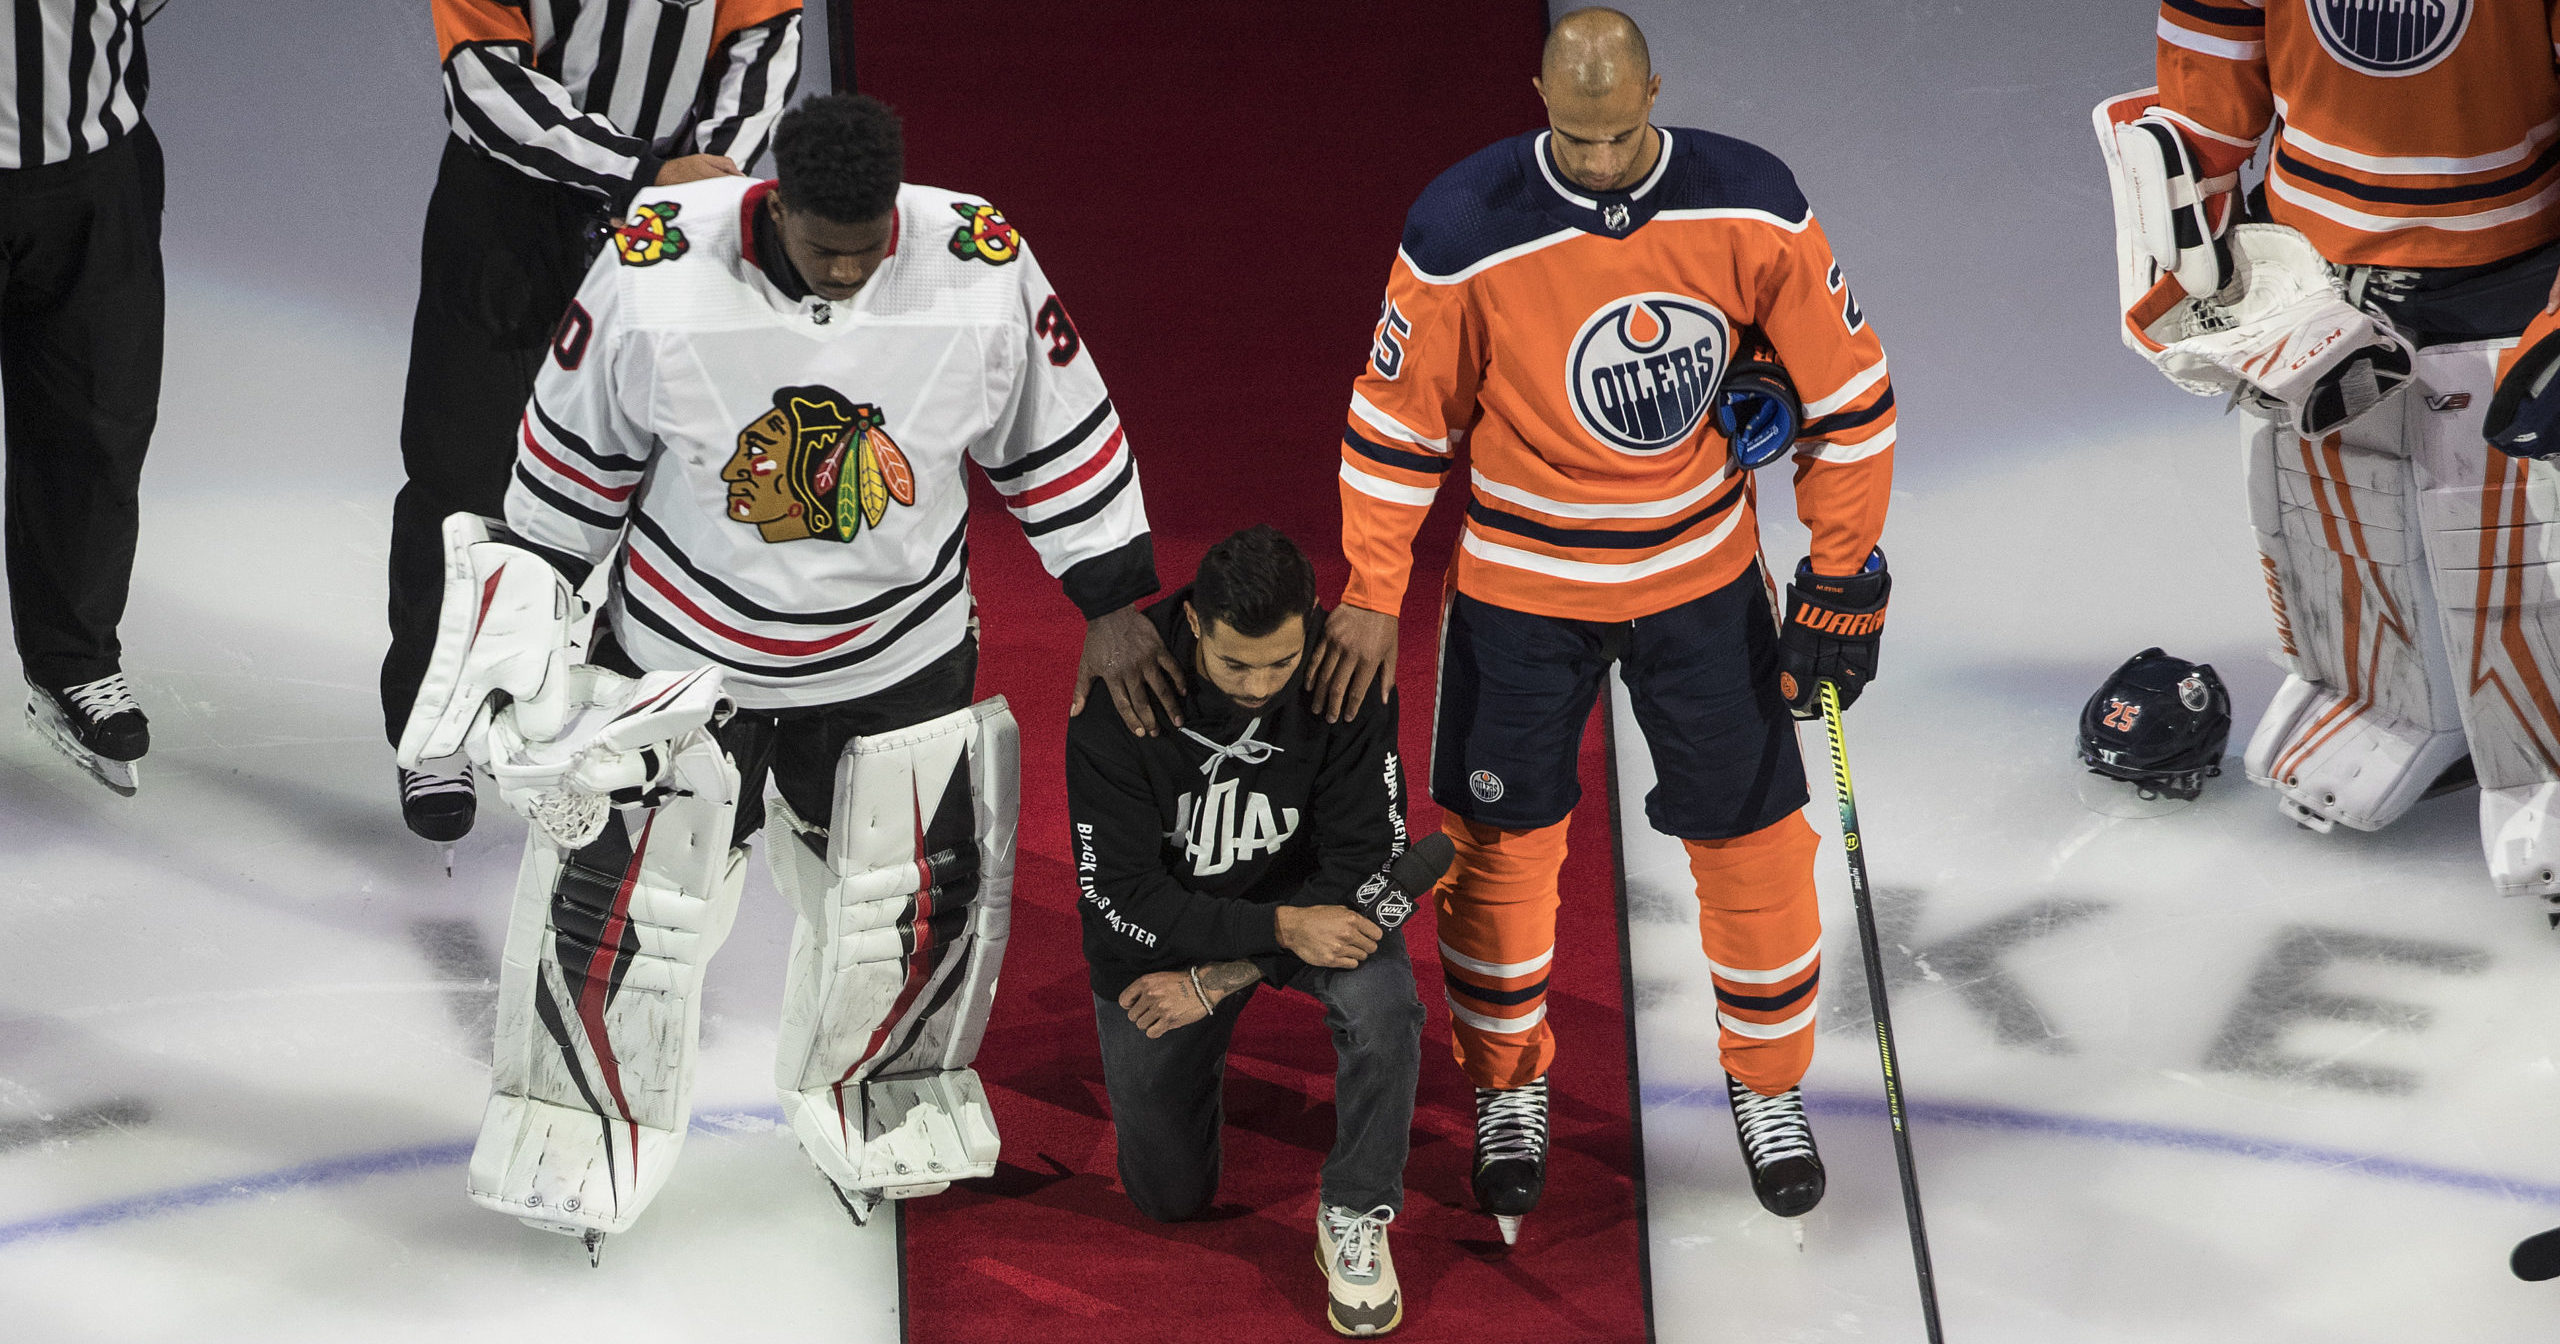 The Minnesota Wild's Matt Dumba takes a knee during the national anthem flanked by the Edmonton Oilers' Darnell Nurse, right, and the Chicago Blackhawks' Malcolm Subban before an NHL hockey game in Edmonton, Alberta on Aug. 1, 2020.